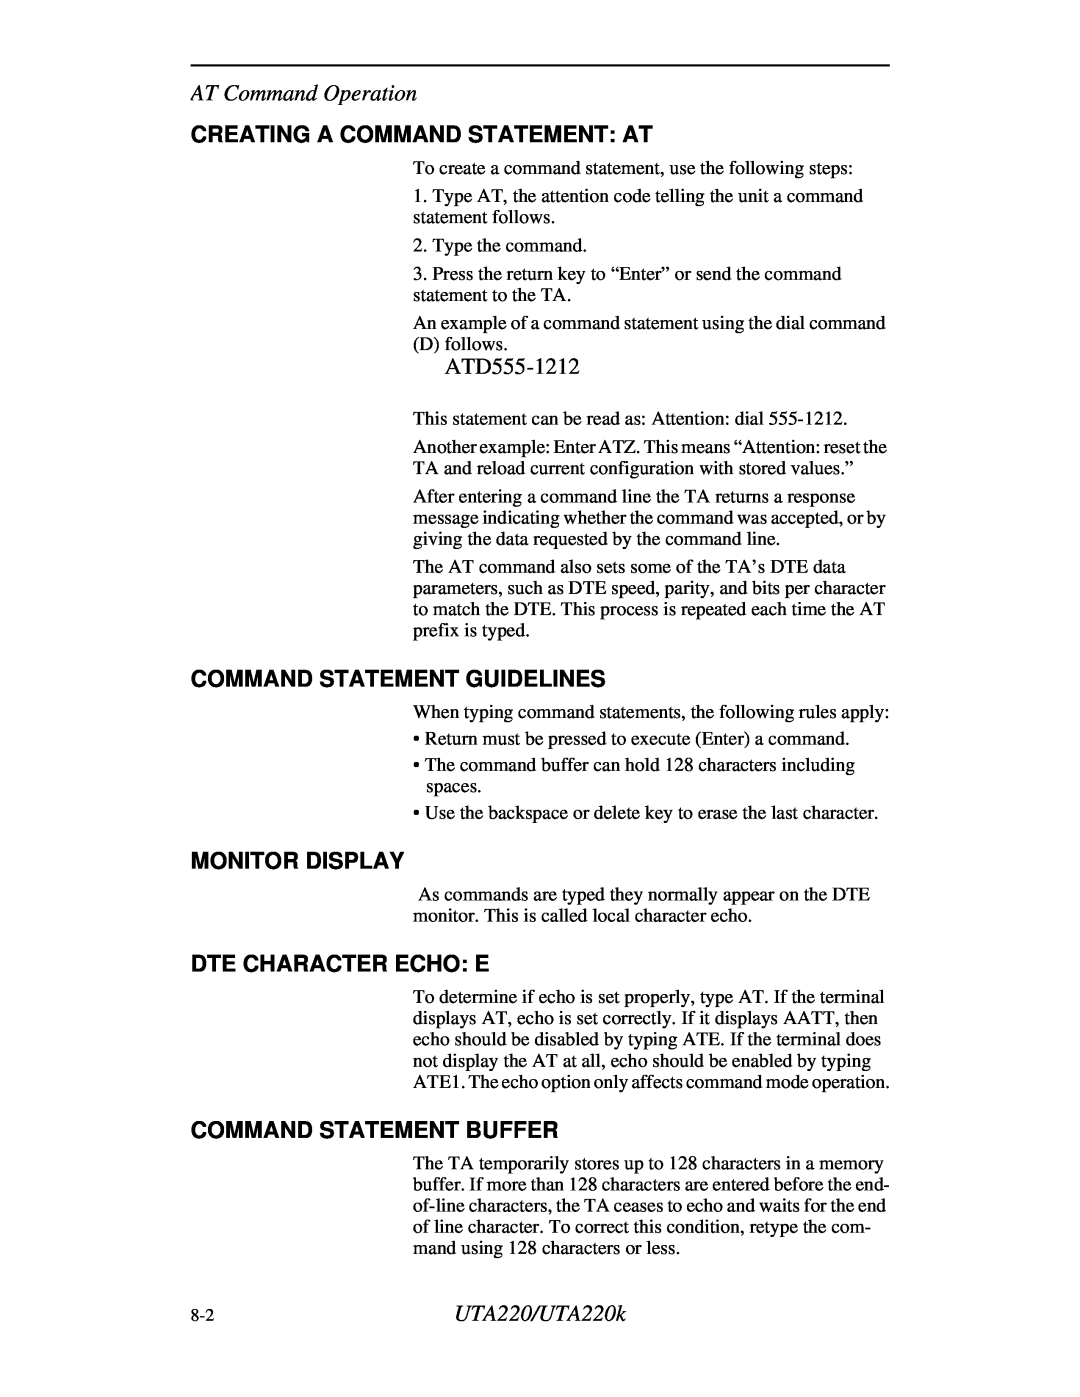 Northern UTA220/UTA220k manual Creating A Command Statement At, ATD555-1212, Command Statement Guidelines, Monitor Display 